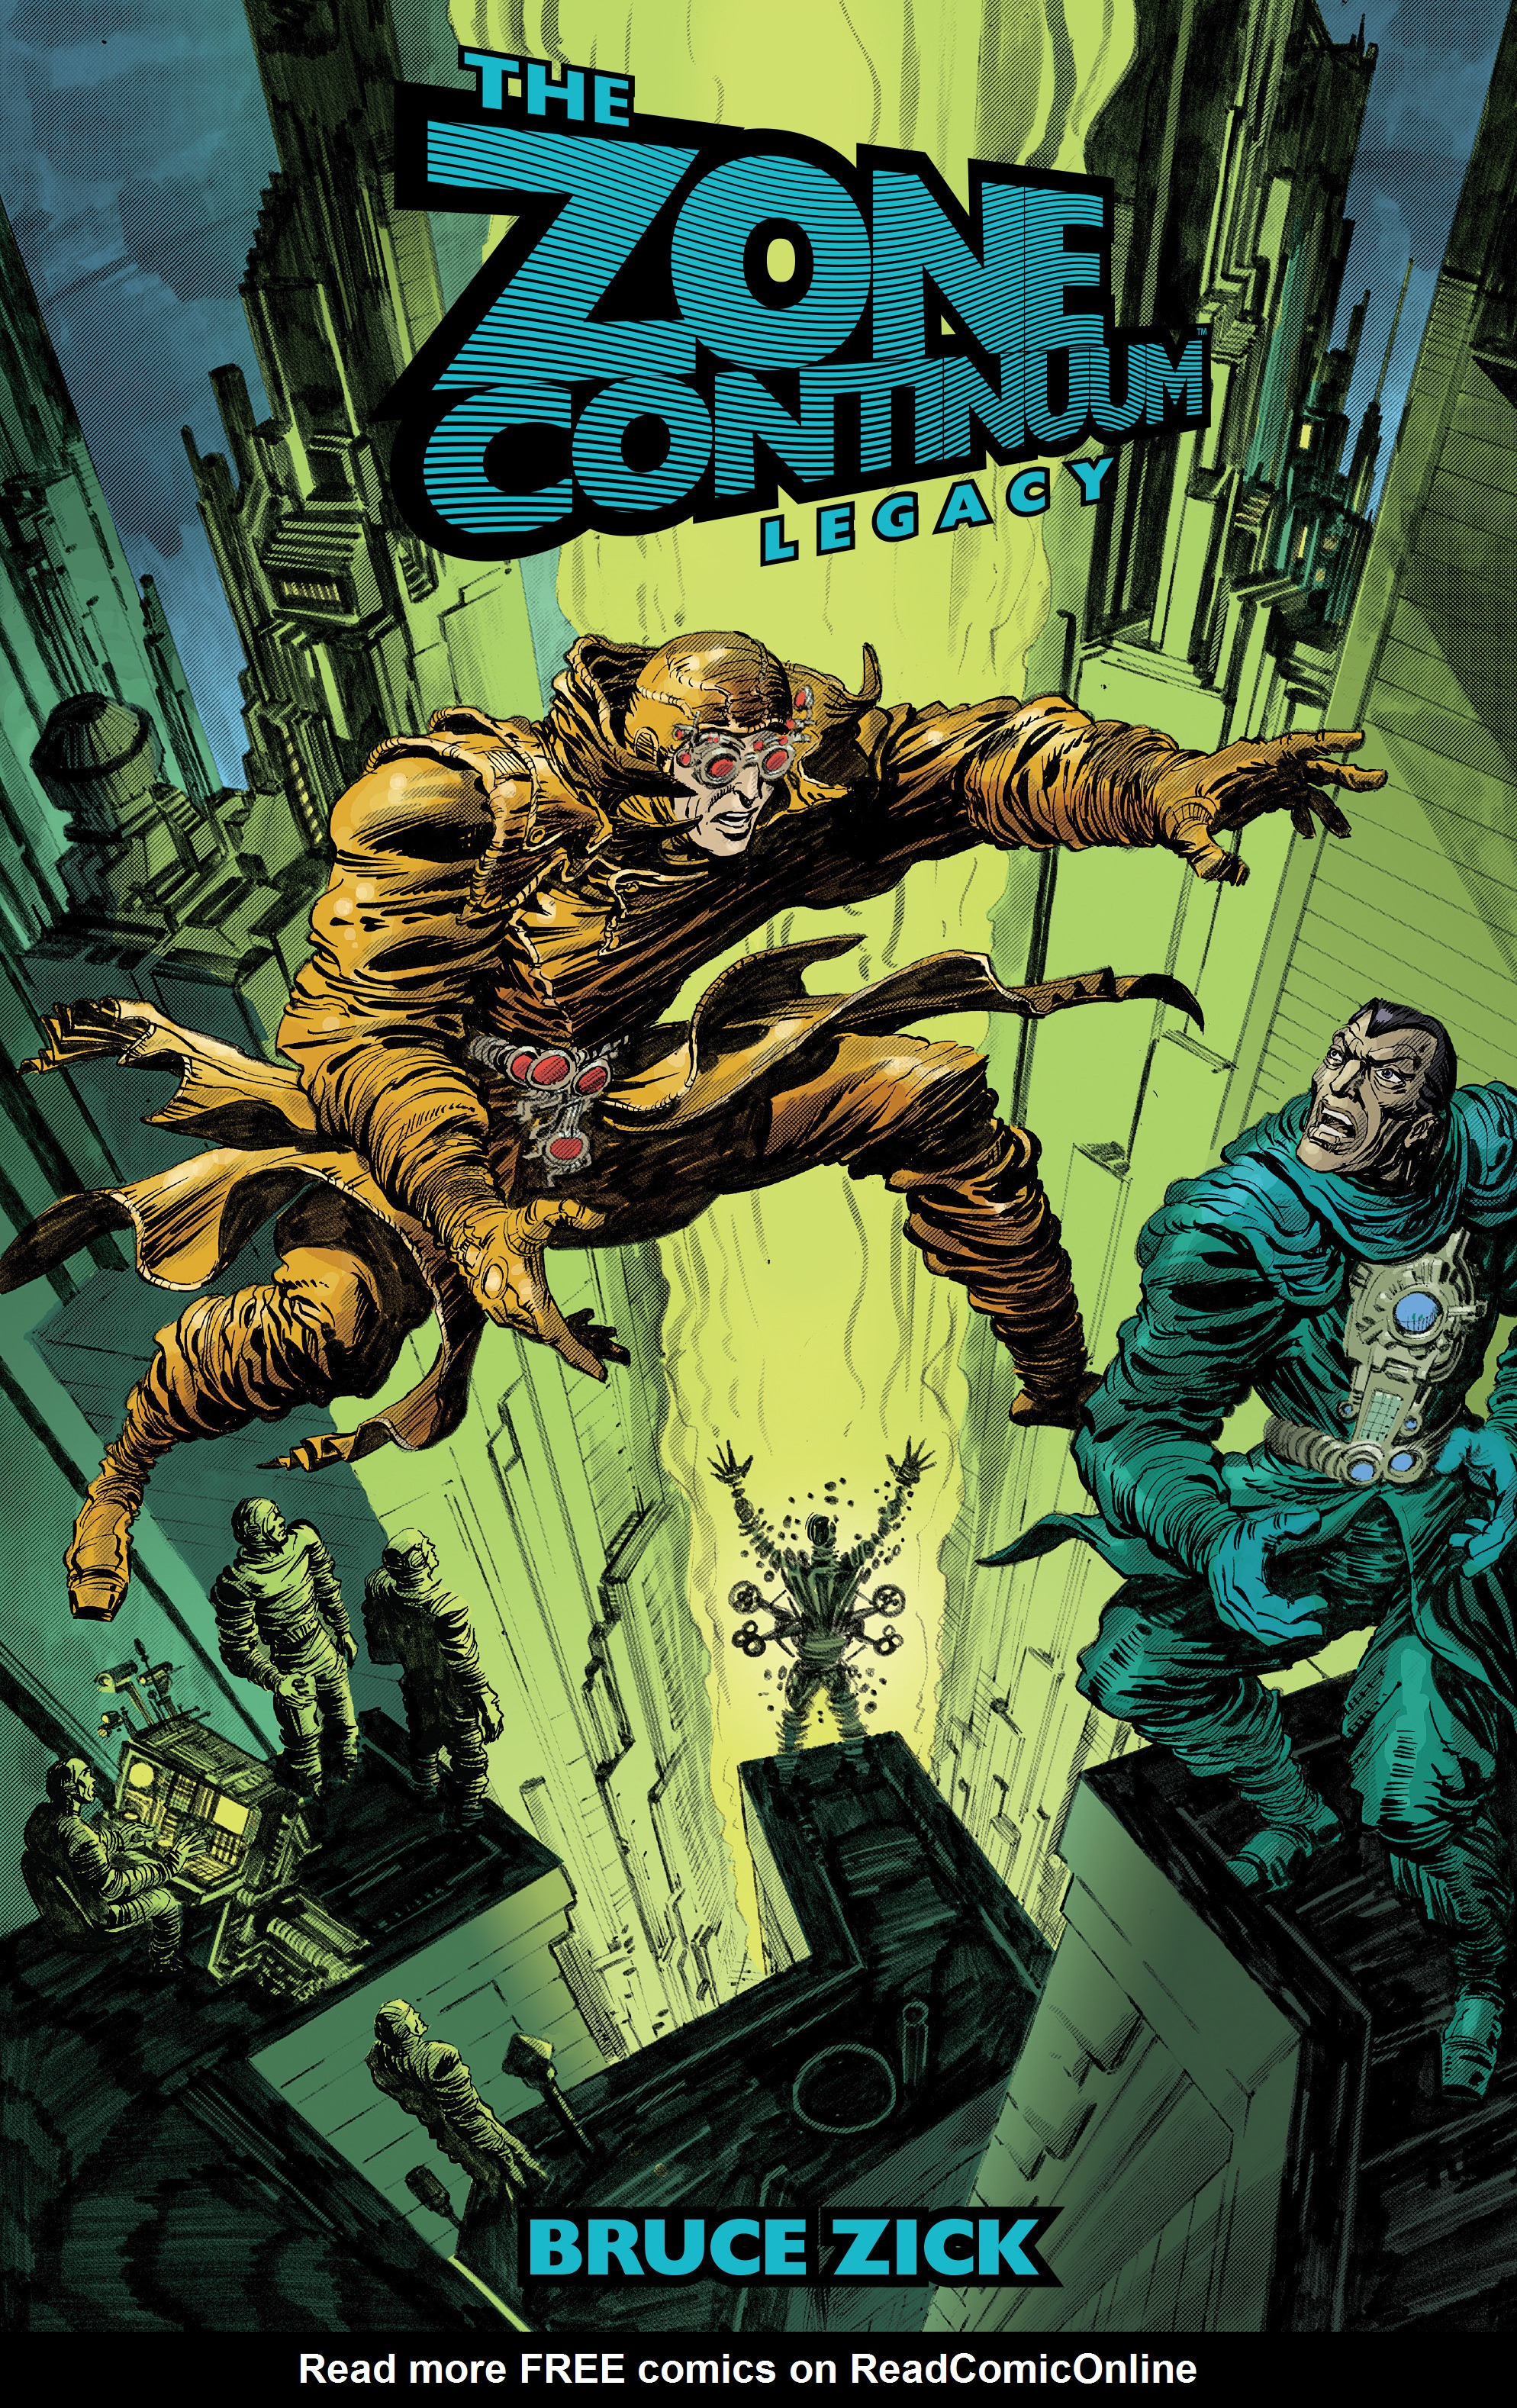 Read online The Zone Continuum: Legacy comic -  Issue # TPB - 1